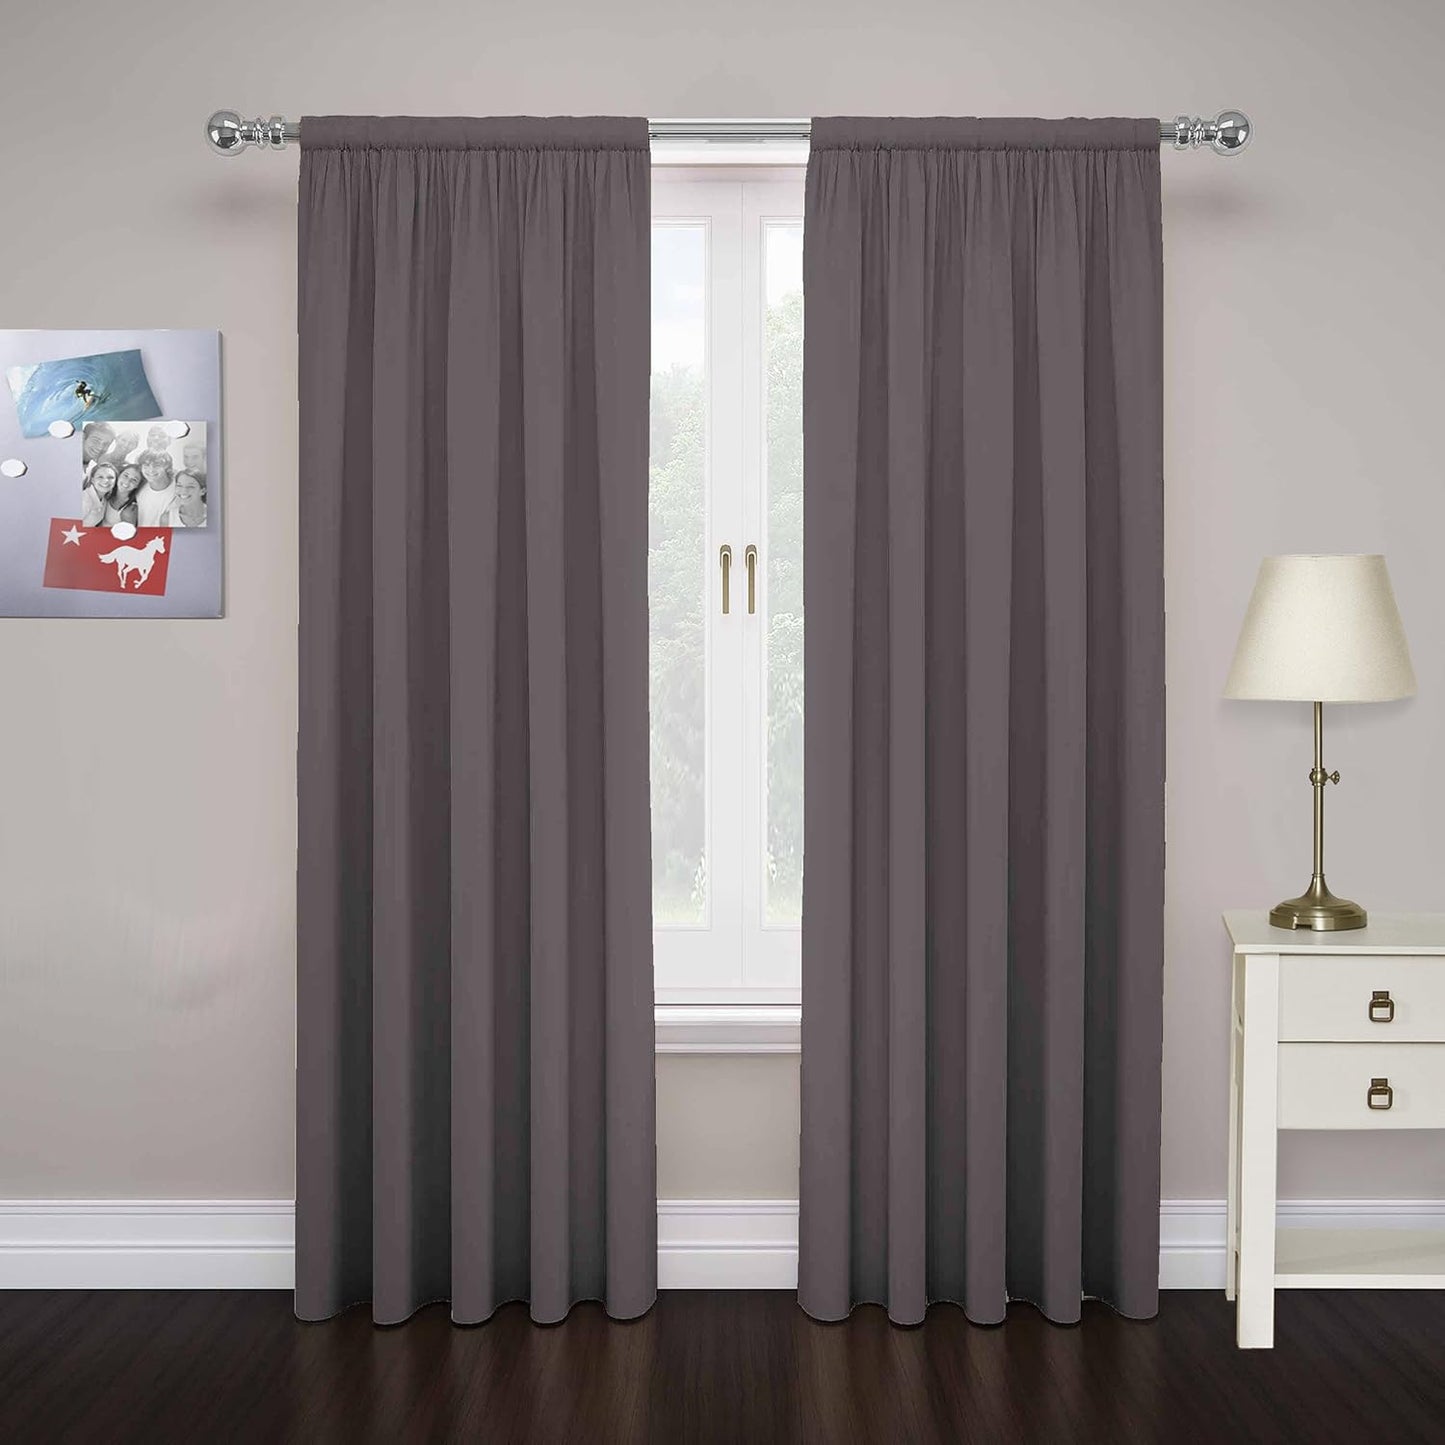 Pairs to Go Cadenza Modern Decorative Rod Pocket Window Curtains for Living Room (2 Panels), 40 in X 84 In, Teal  Keeco LLC Smoke 40 In X 84 In 